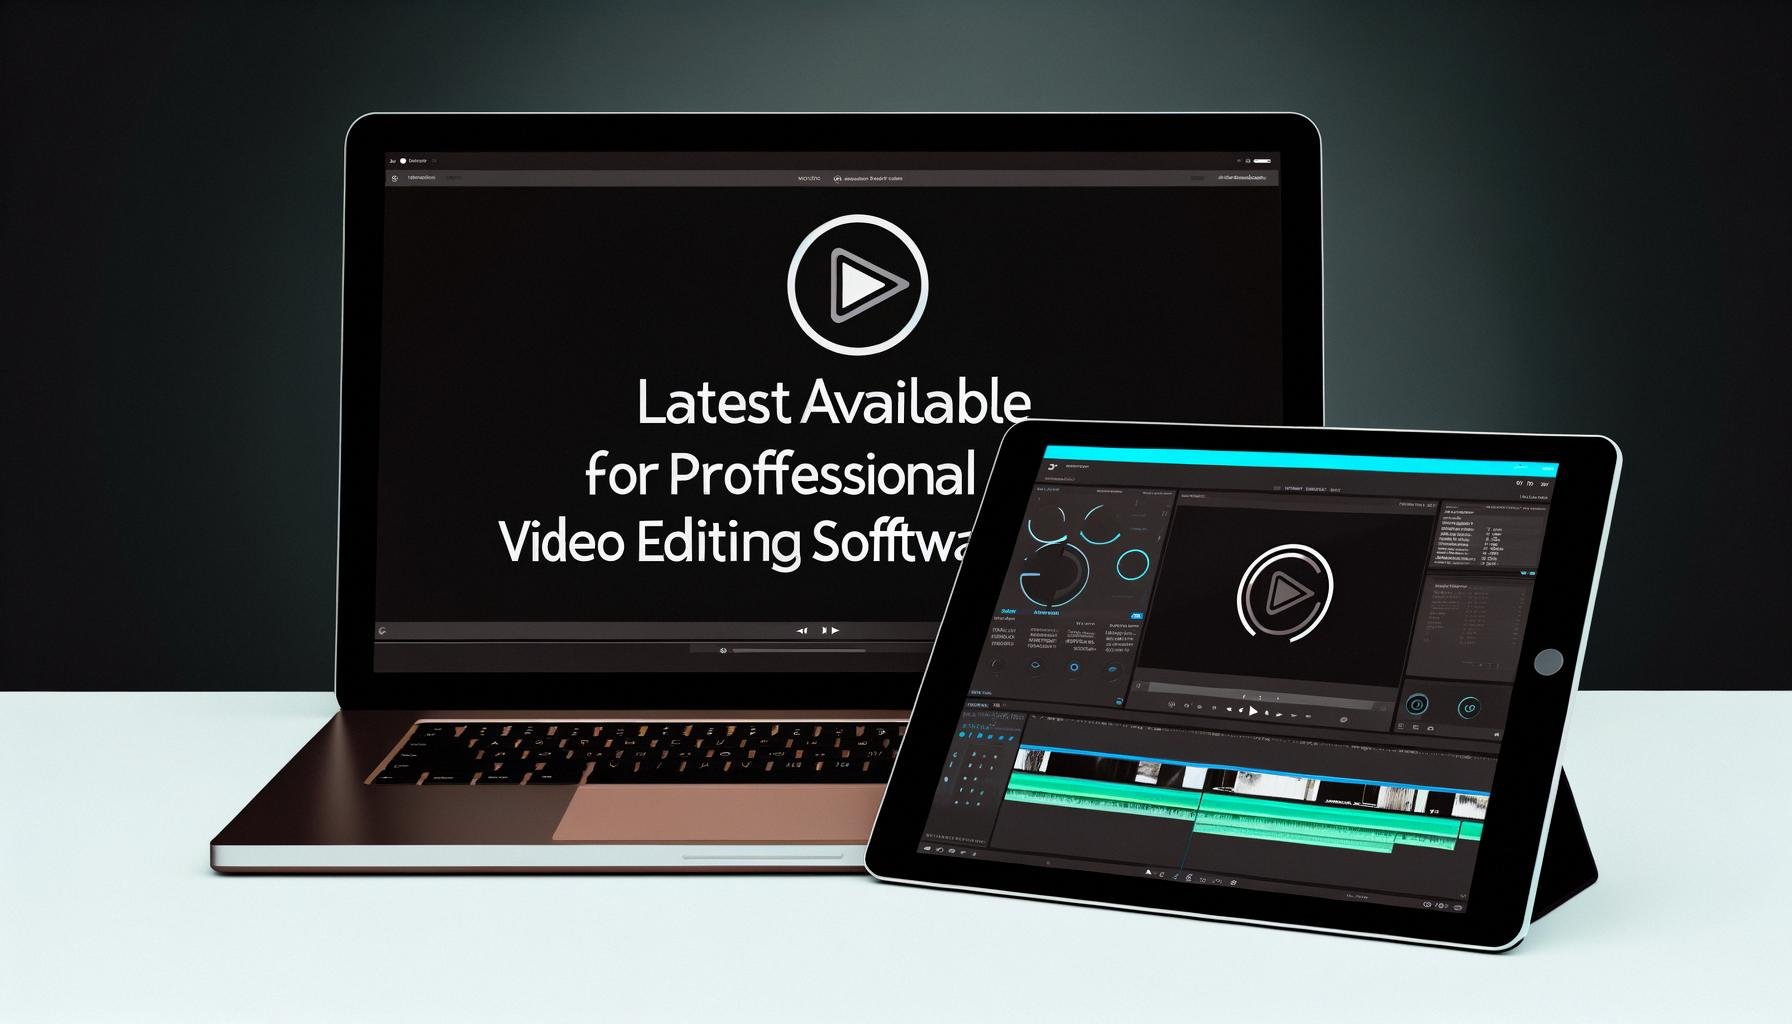 Apple updates Final Cut Pro for iPad and Mac